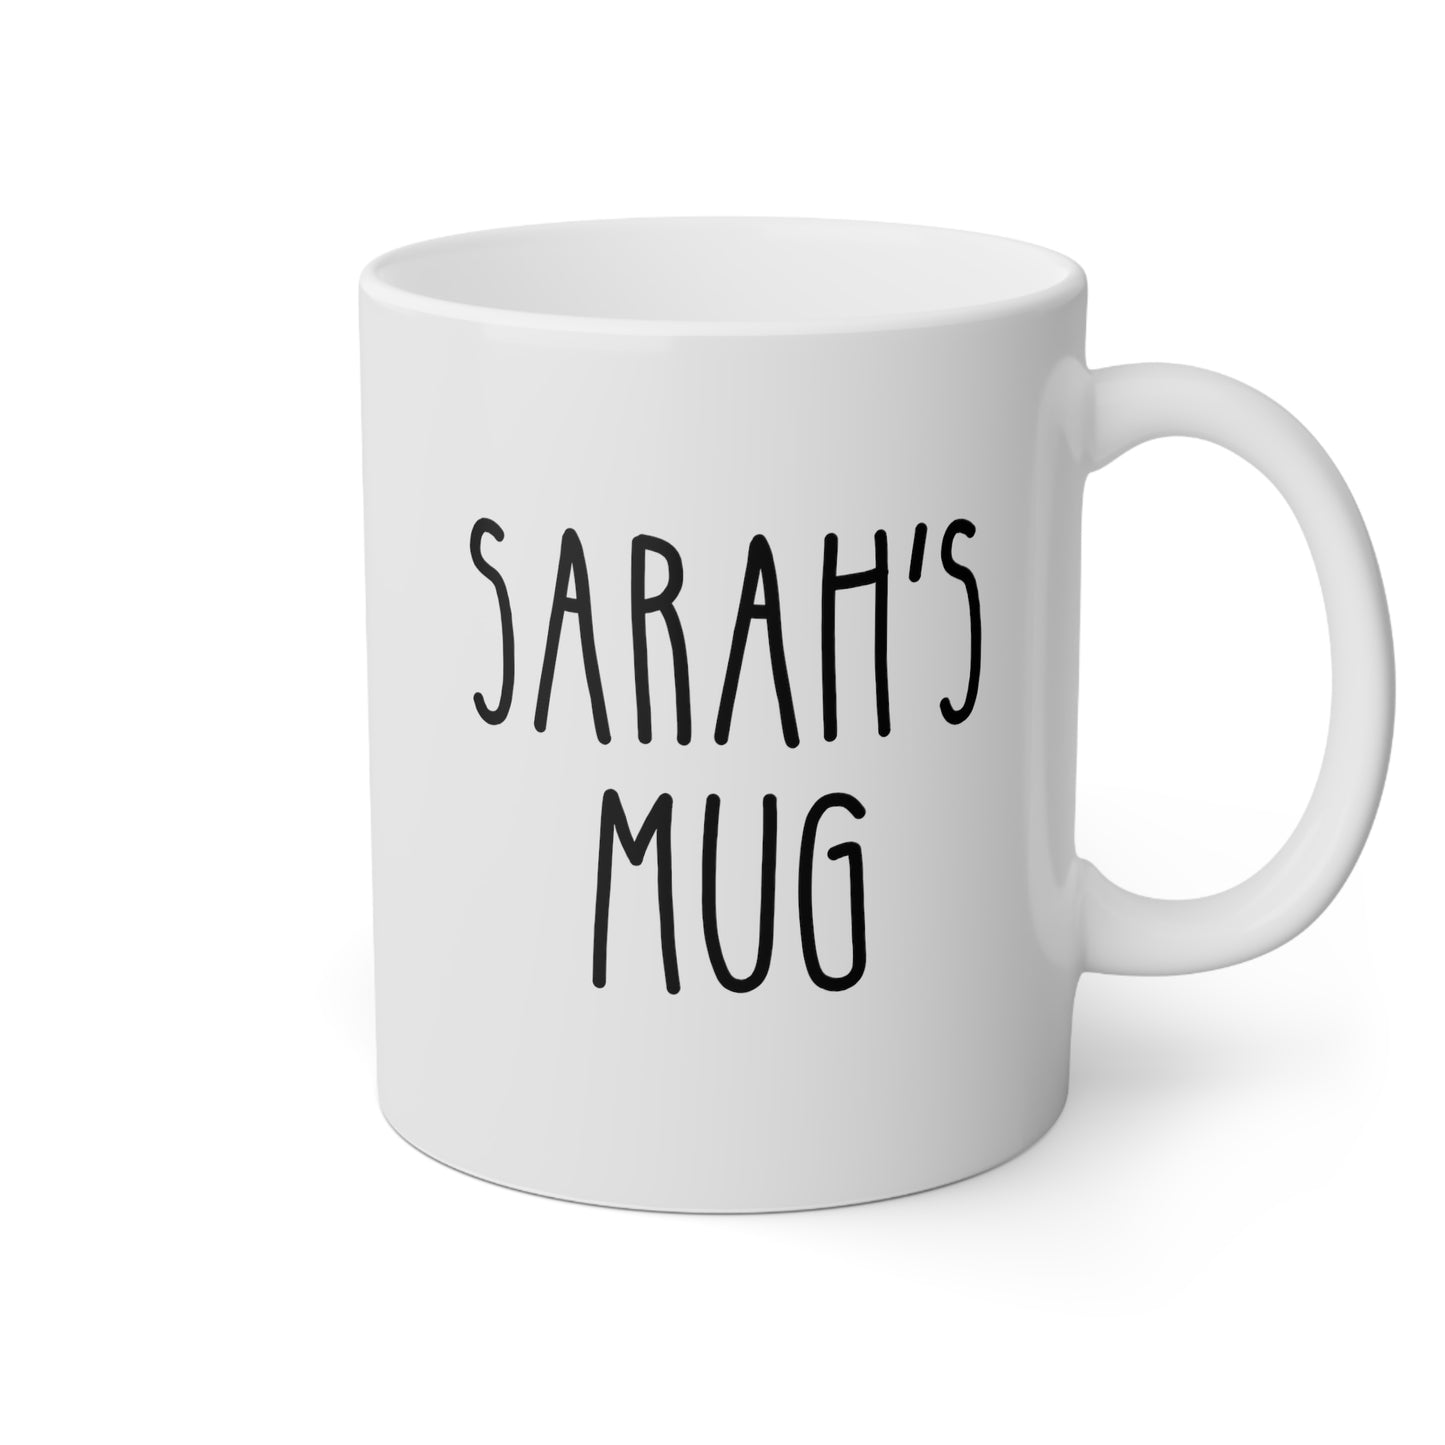 Personalized Name 11oz white funny large coffee mug gift for friend him her quote tall font custom customized cup waveywares wavey wares wavywares wavy wares